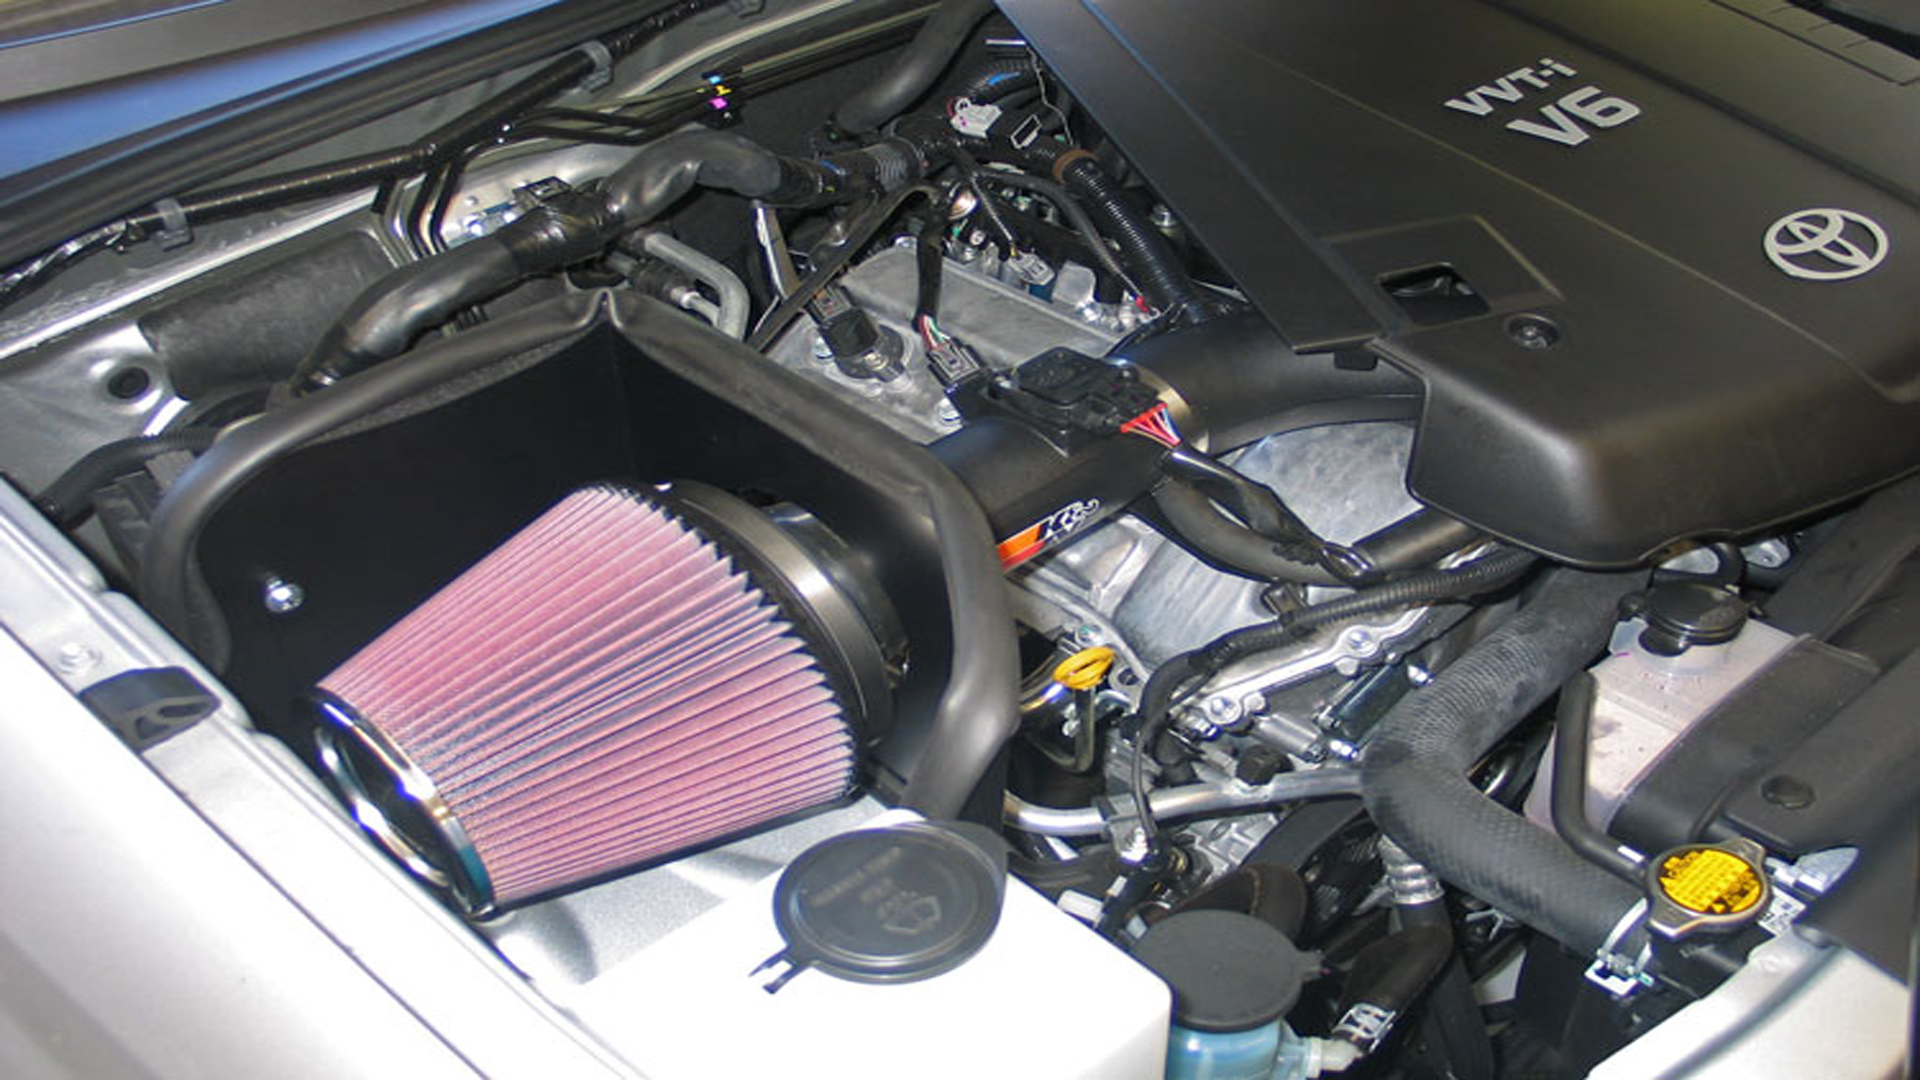 Toyota Tacoma: Air Intake Reviews and How to Install | Yotatech